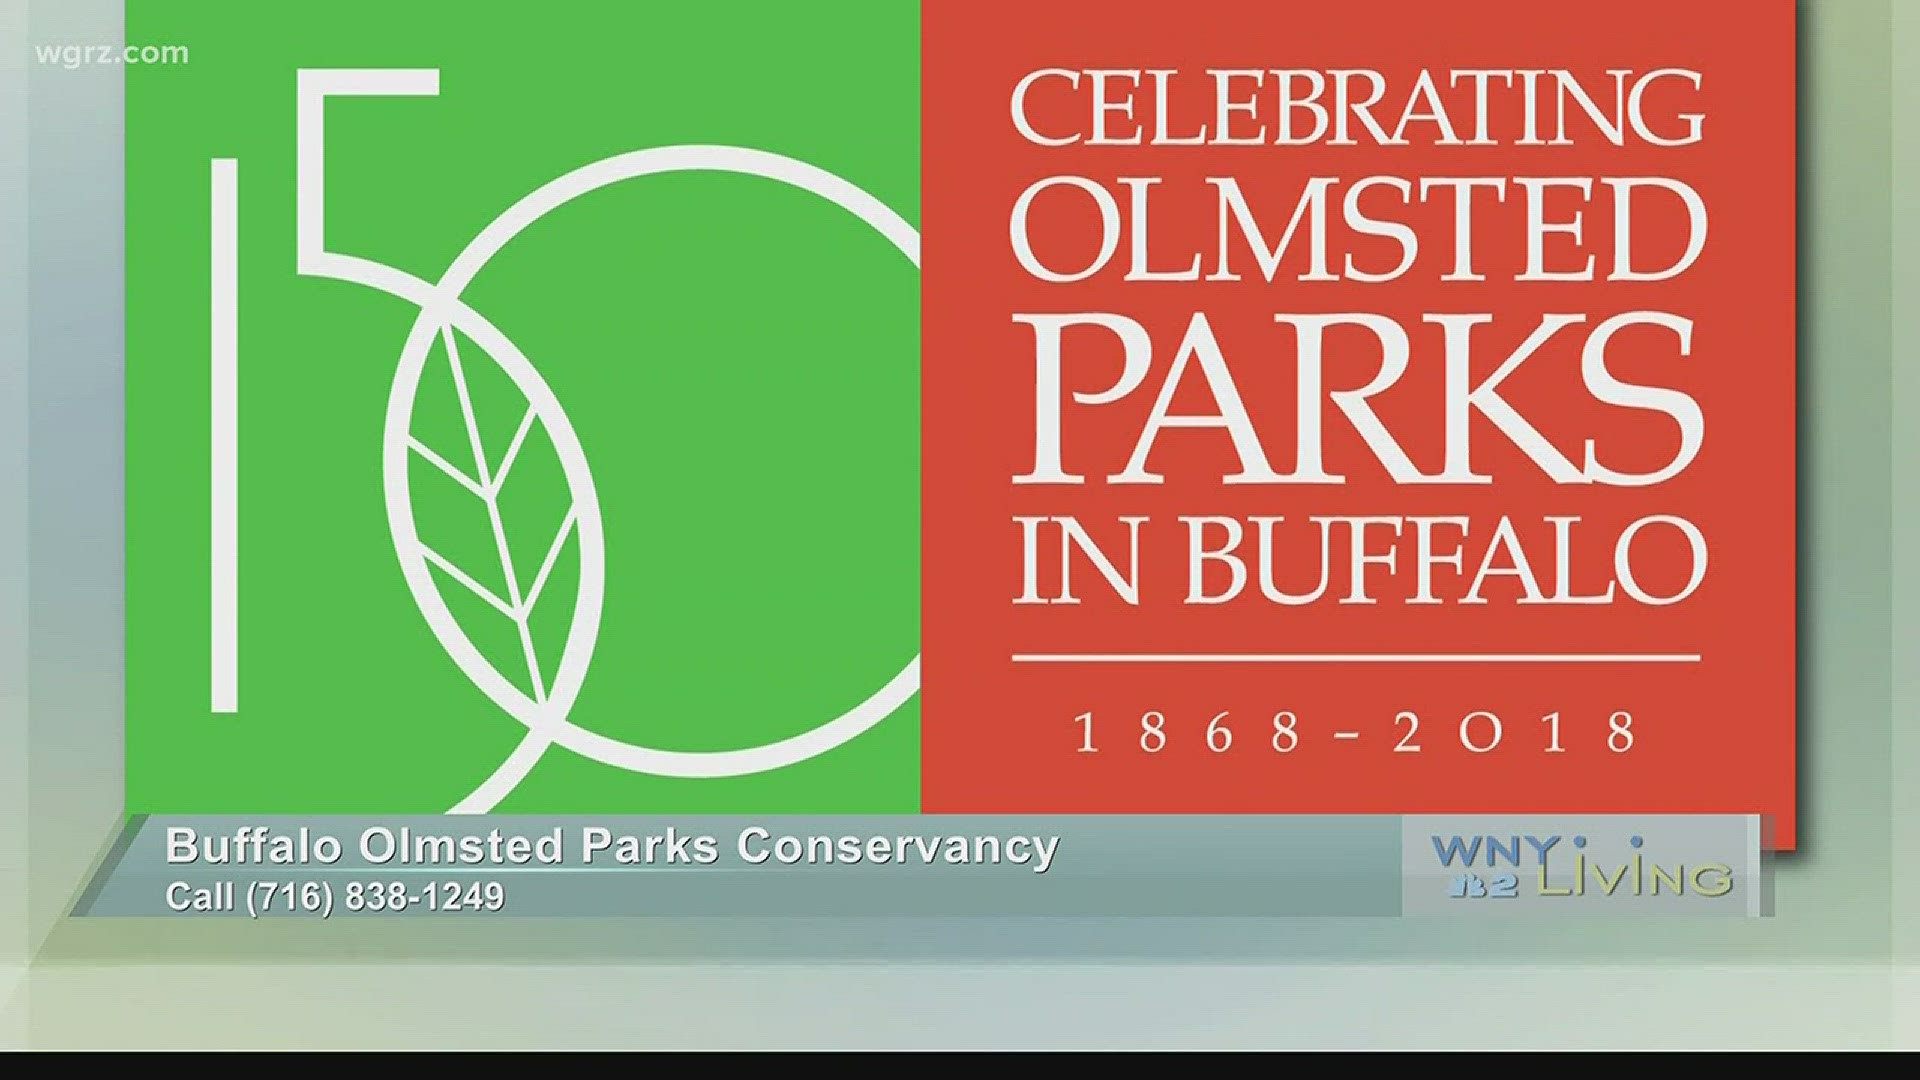 WNY Living - January 29 - Buffalo Olmsted Parks Conservancy